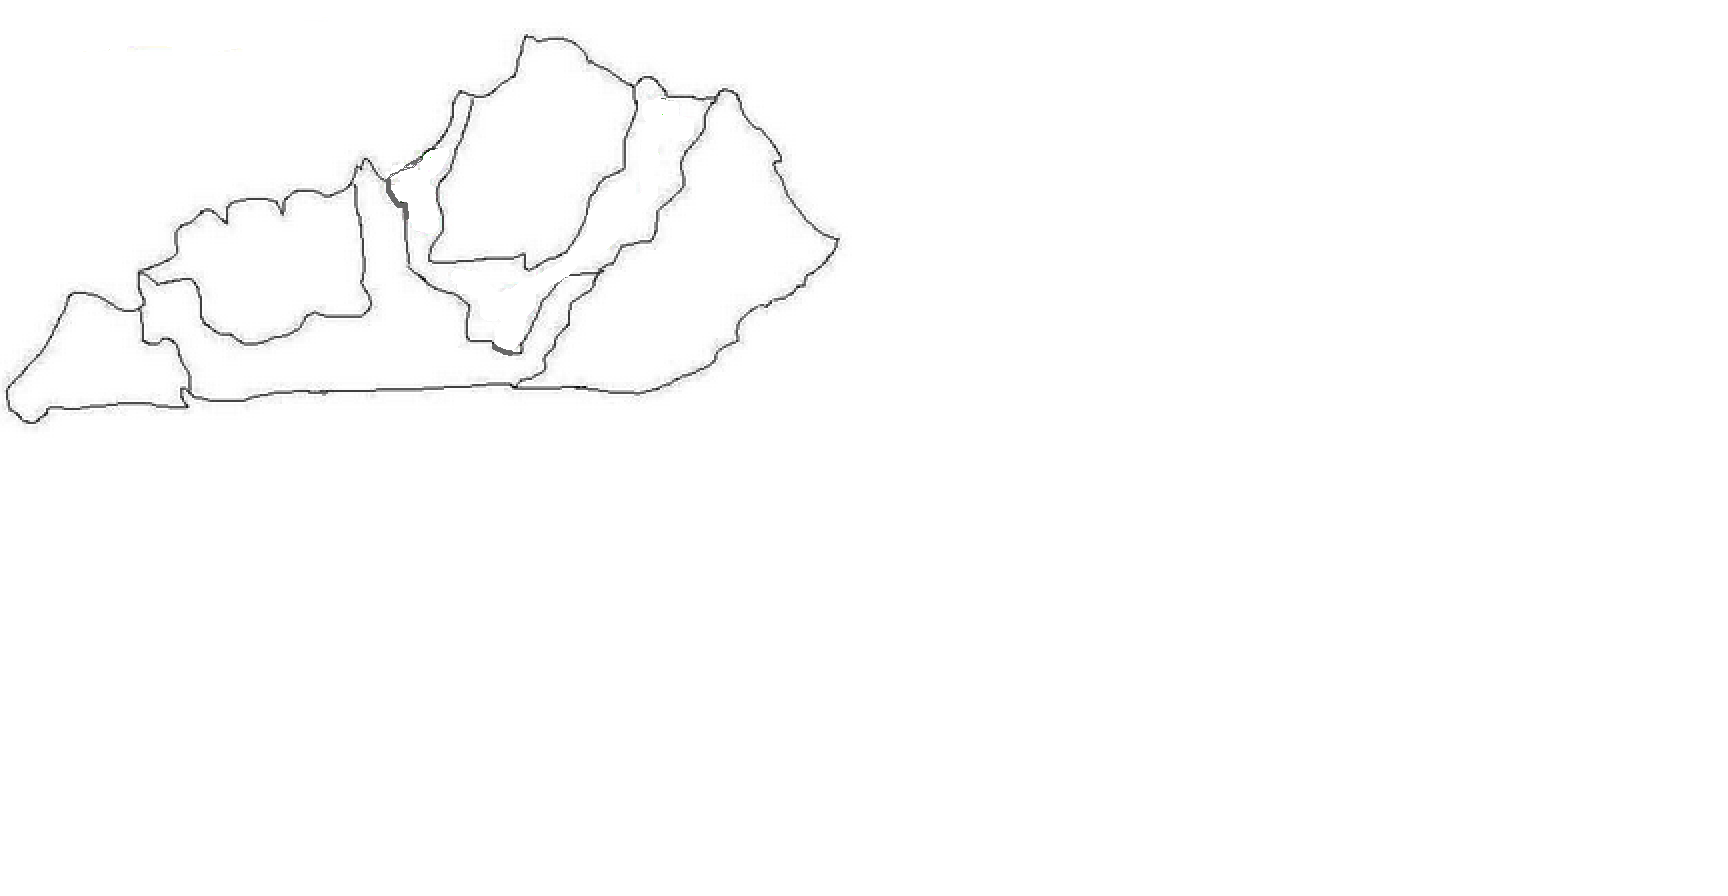 blank_ky_regions_map_for_test.png